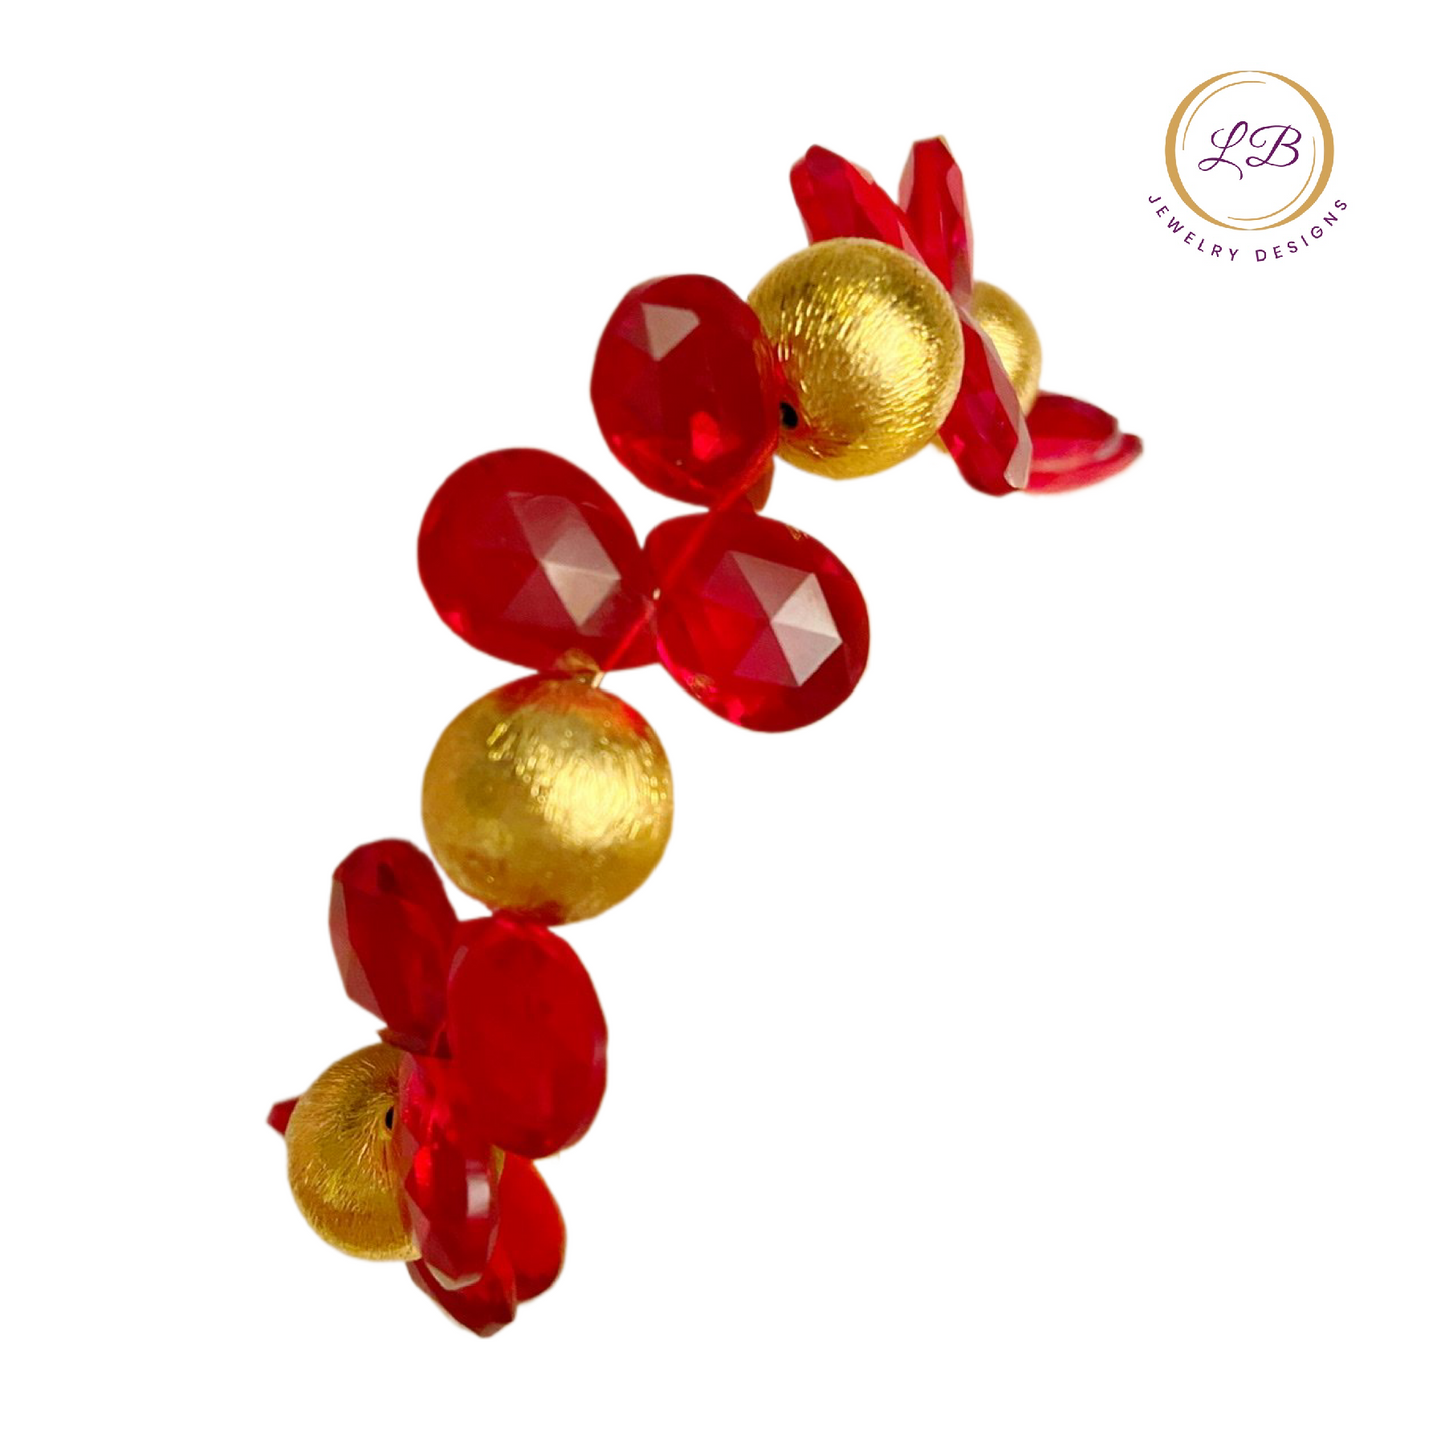 Red Ruby Briolette-Cut Gemstones Bracelet(s) with Pearls and Brushed Gold Vermeil